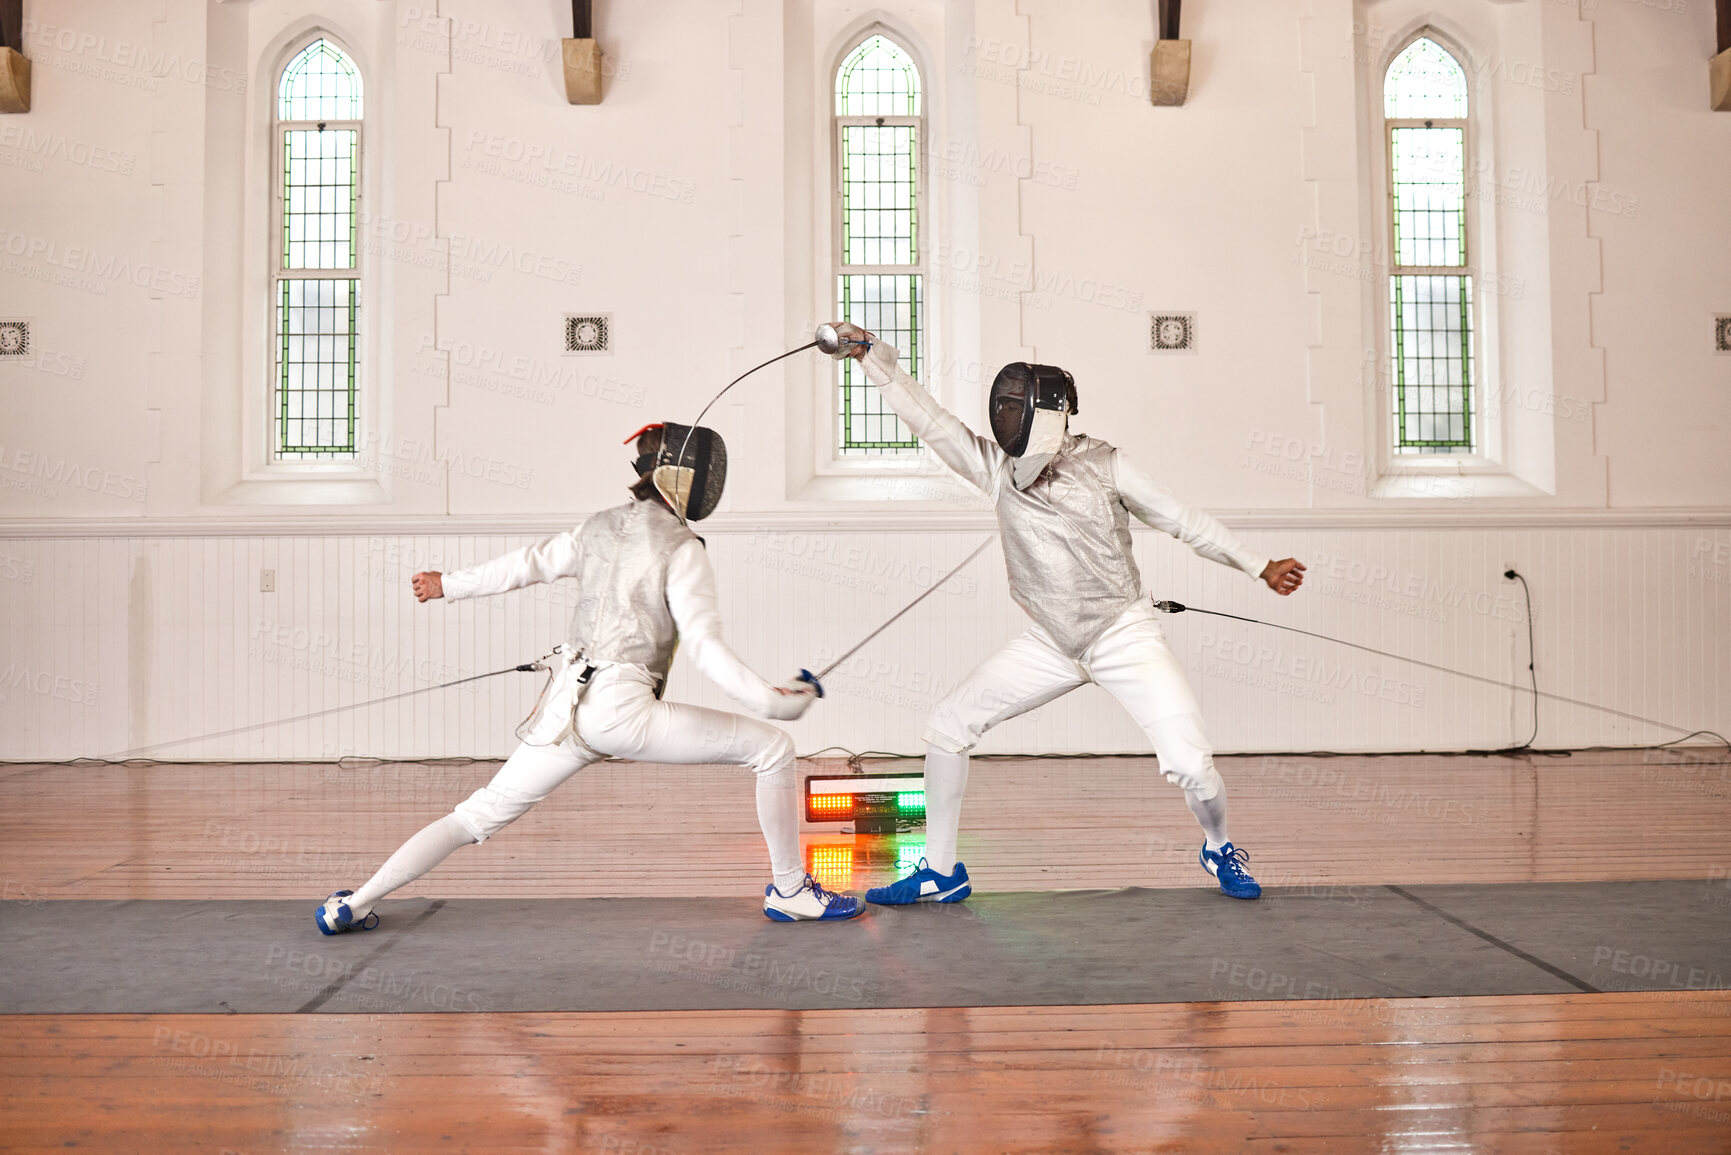 Buy stock photo Sword, sport and men fight in fencing training, exercise or workout in a hall. Martial arts, match and fencers or people with mask and costume for fitness, competition or stab target in swordplay